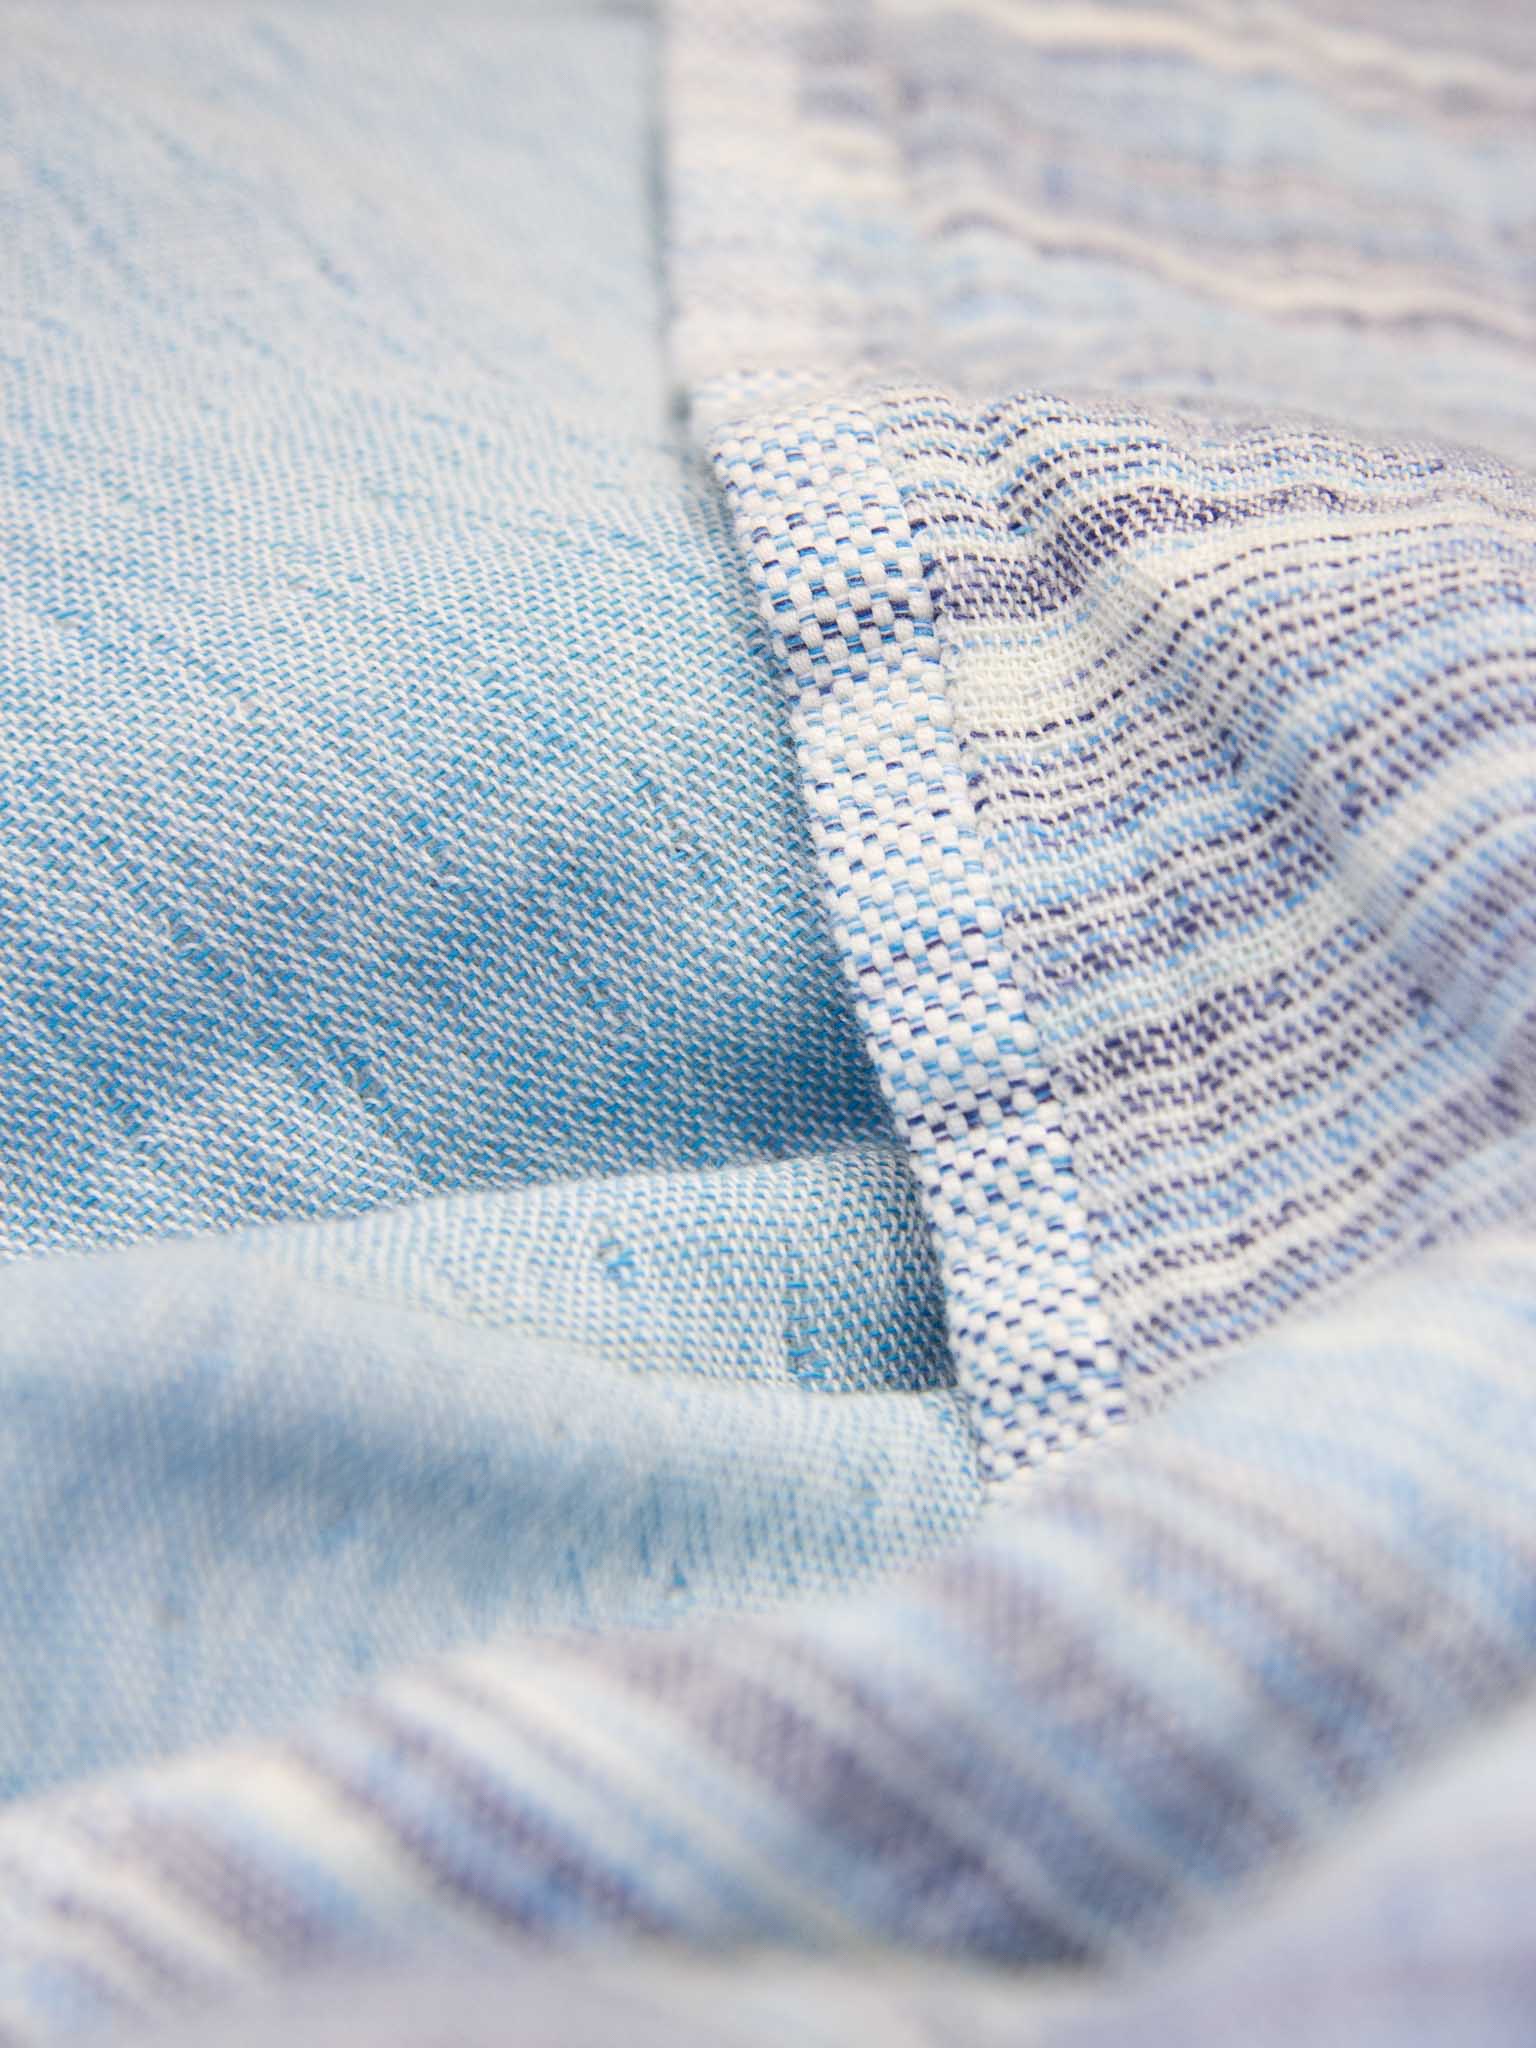 Blue patterned double sided beach towel close up